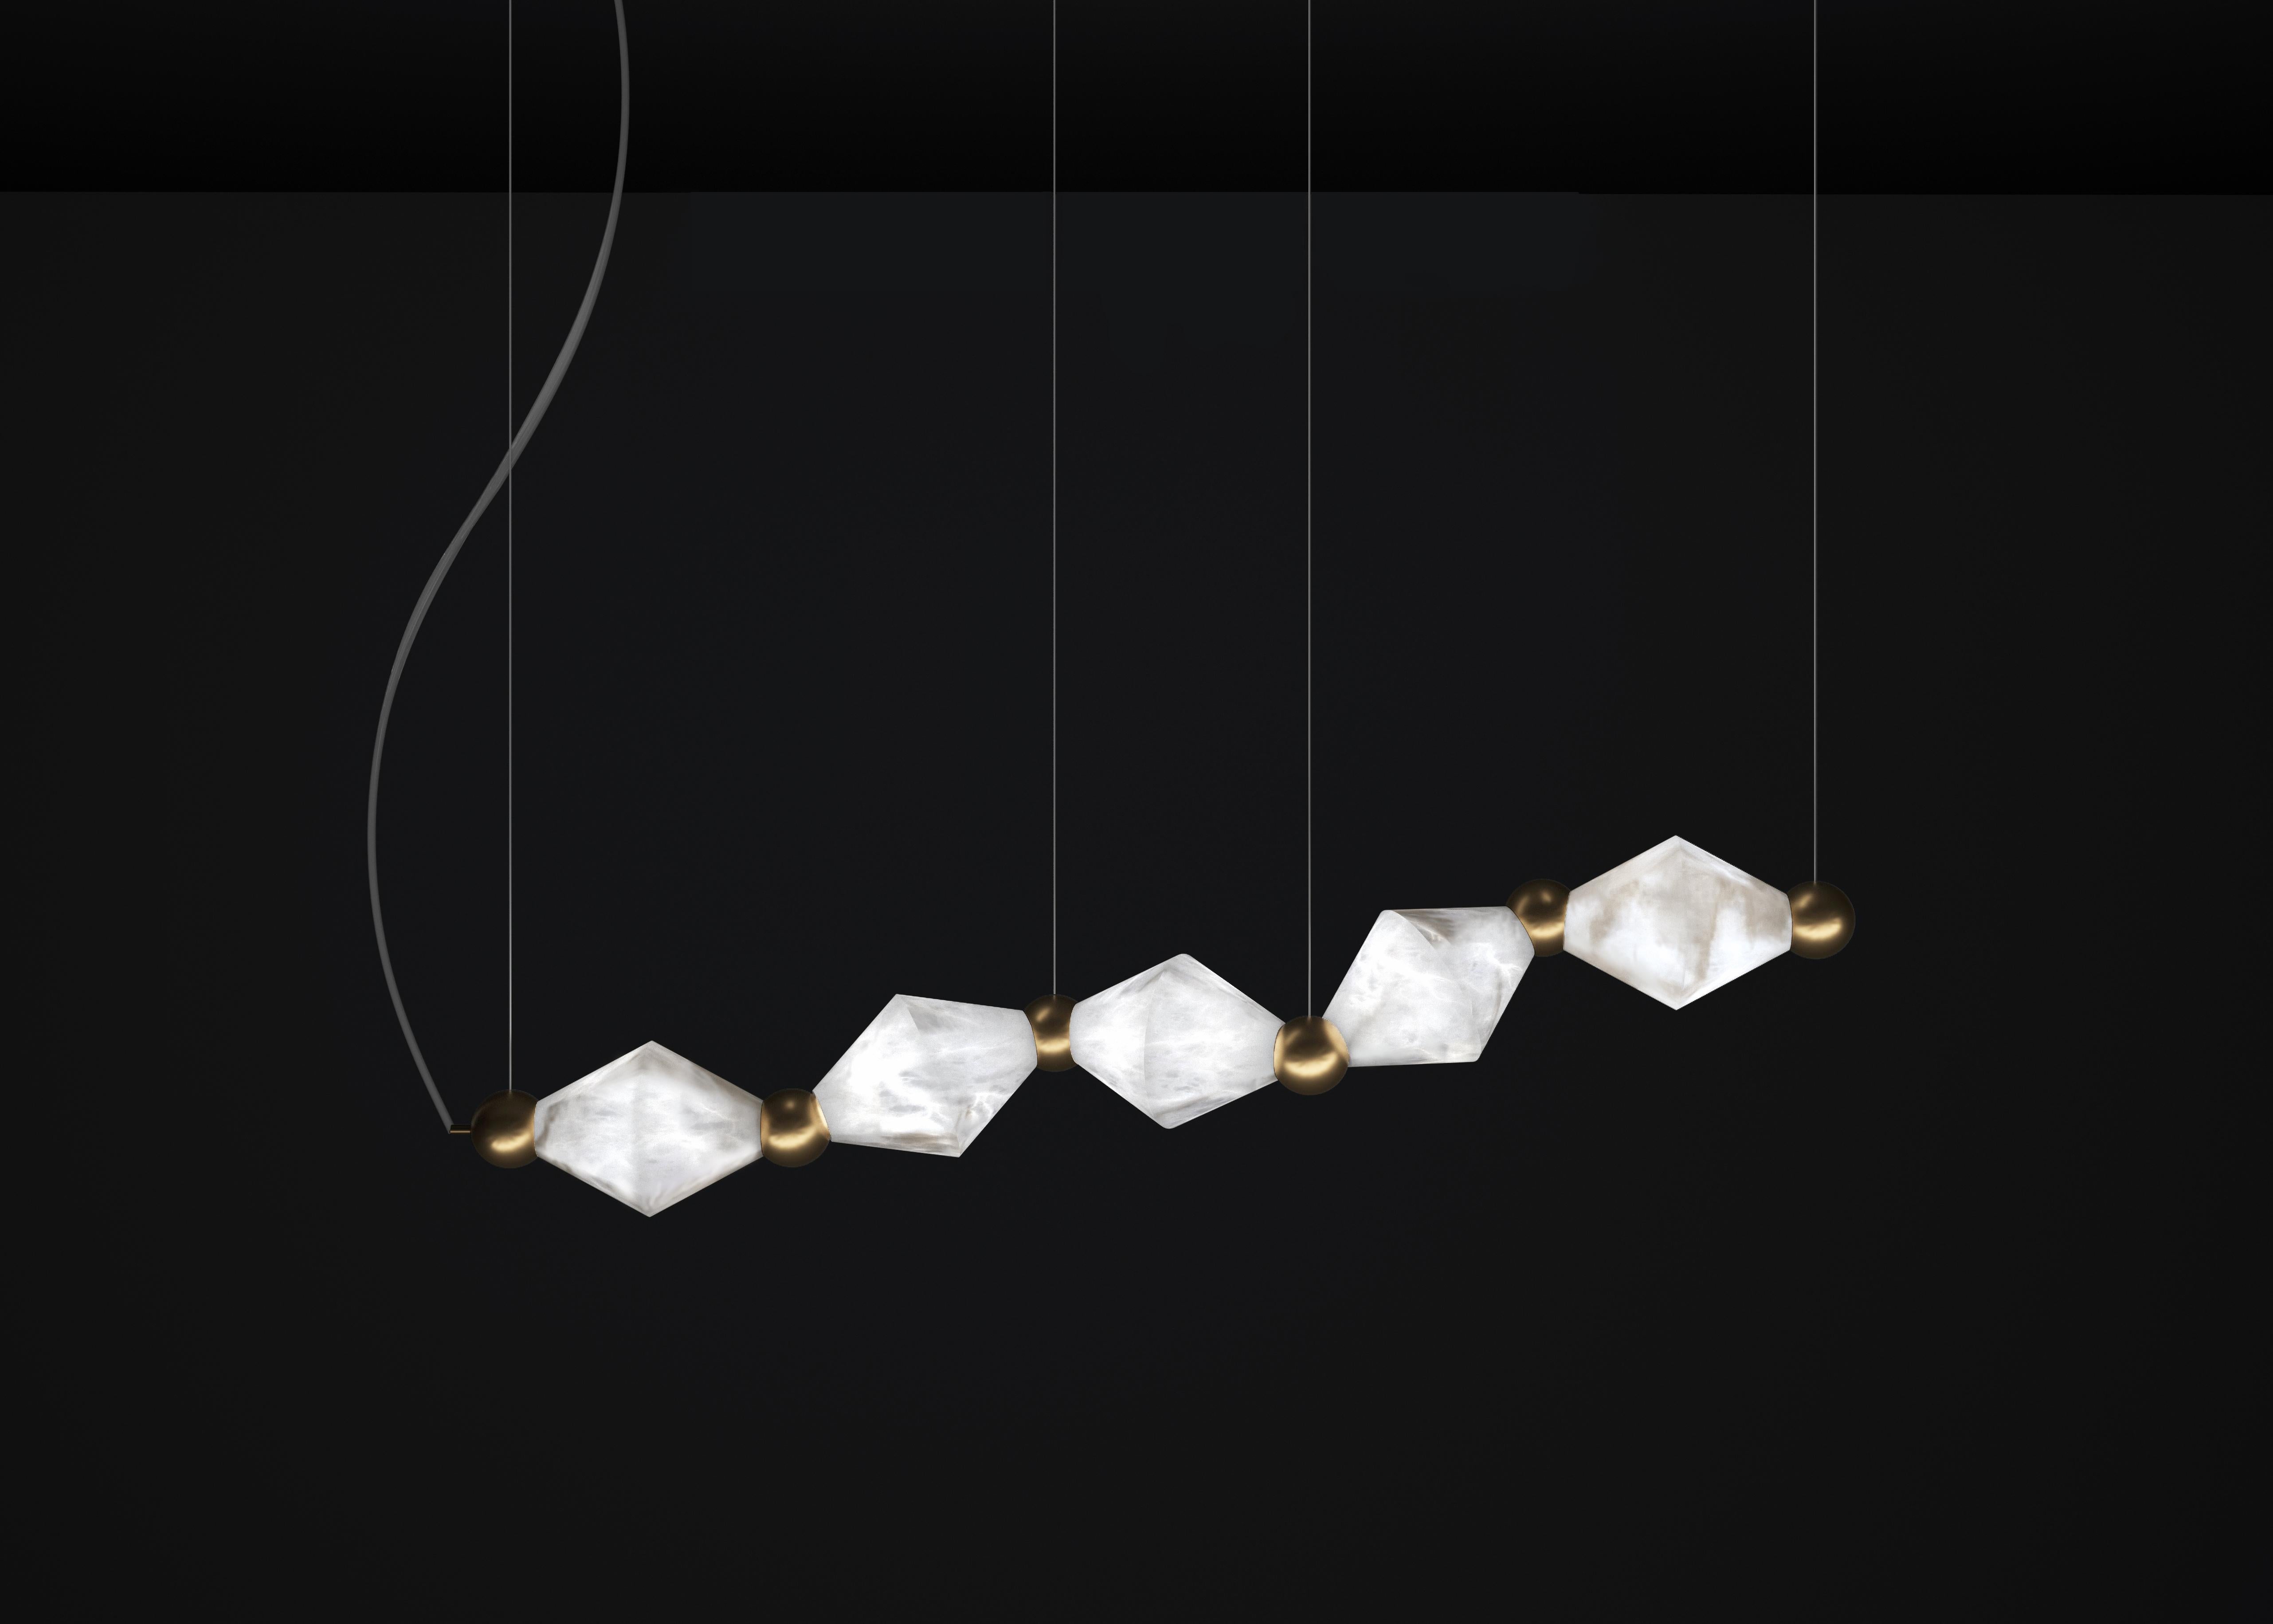 Chronos Bronze Pendant Lamp by Alabastro Italiano
Dimensions: D 21 x W 142 x H 31 cm.
Materials: White alabaster and bronze.

Available in different finishes: Shiny Silver, Bronze, Brushed Brass, Ruggine of Florence, Brushed Burnished, Shiny Gold,